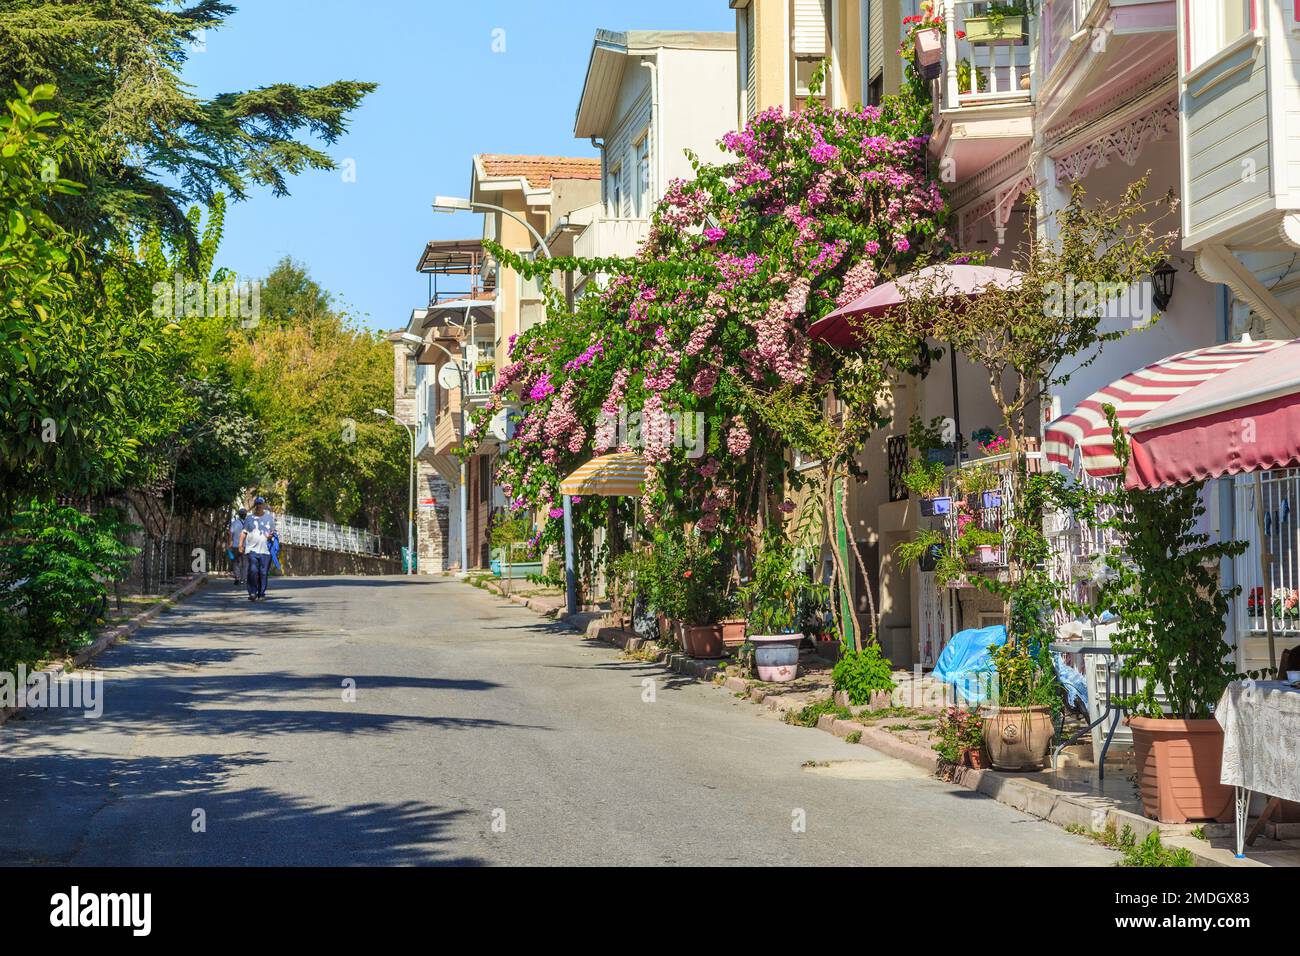 HEYBELIADA ISLAND, TURKEY - SEPTEMBER 15, 2017: This is one of the streets of a small island from the Prince Islands group in the Sea of Marmara. Stock Photo